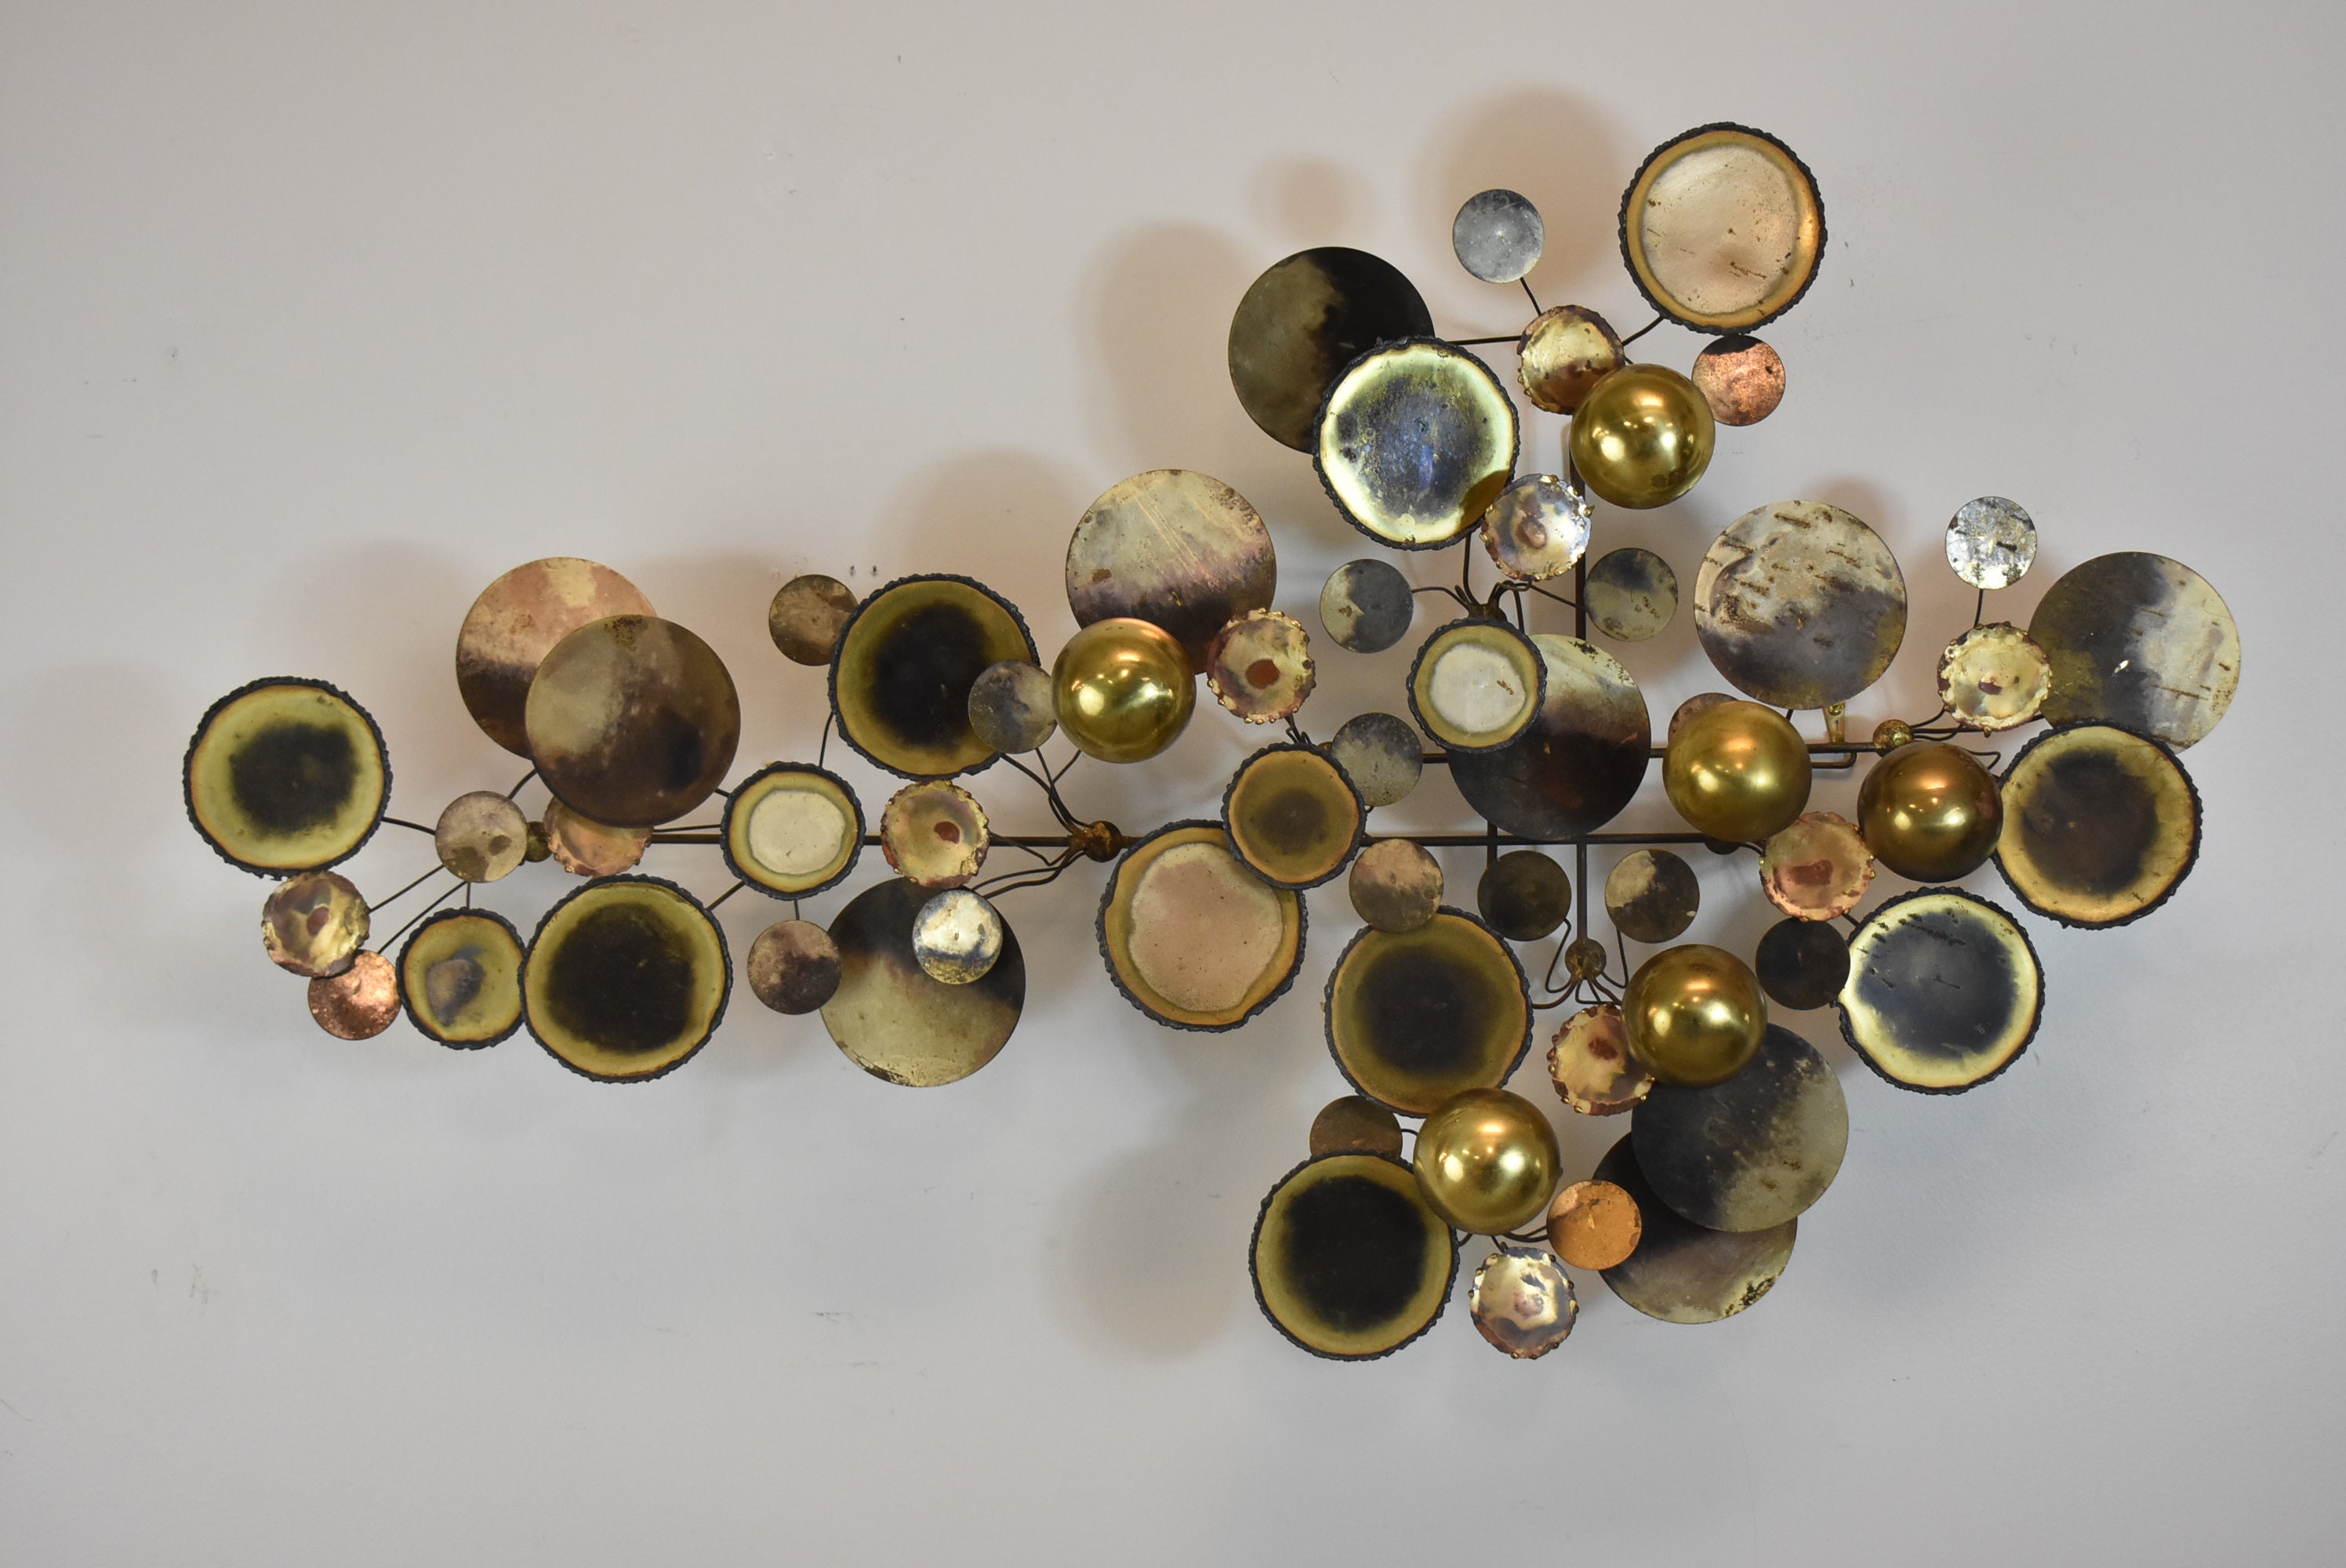 Brass Wall Sculpture by Curtis Jere Titled "Raindrops" circa 1975